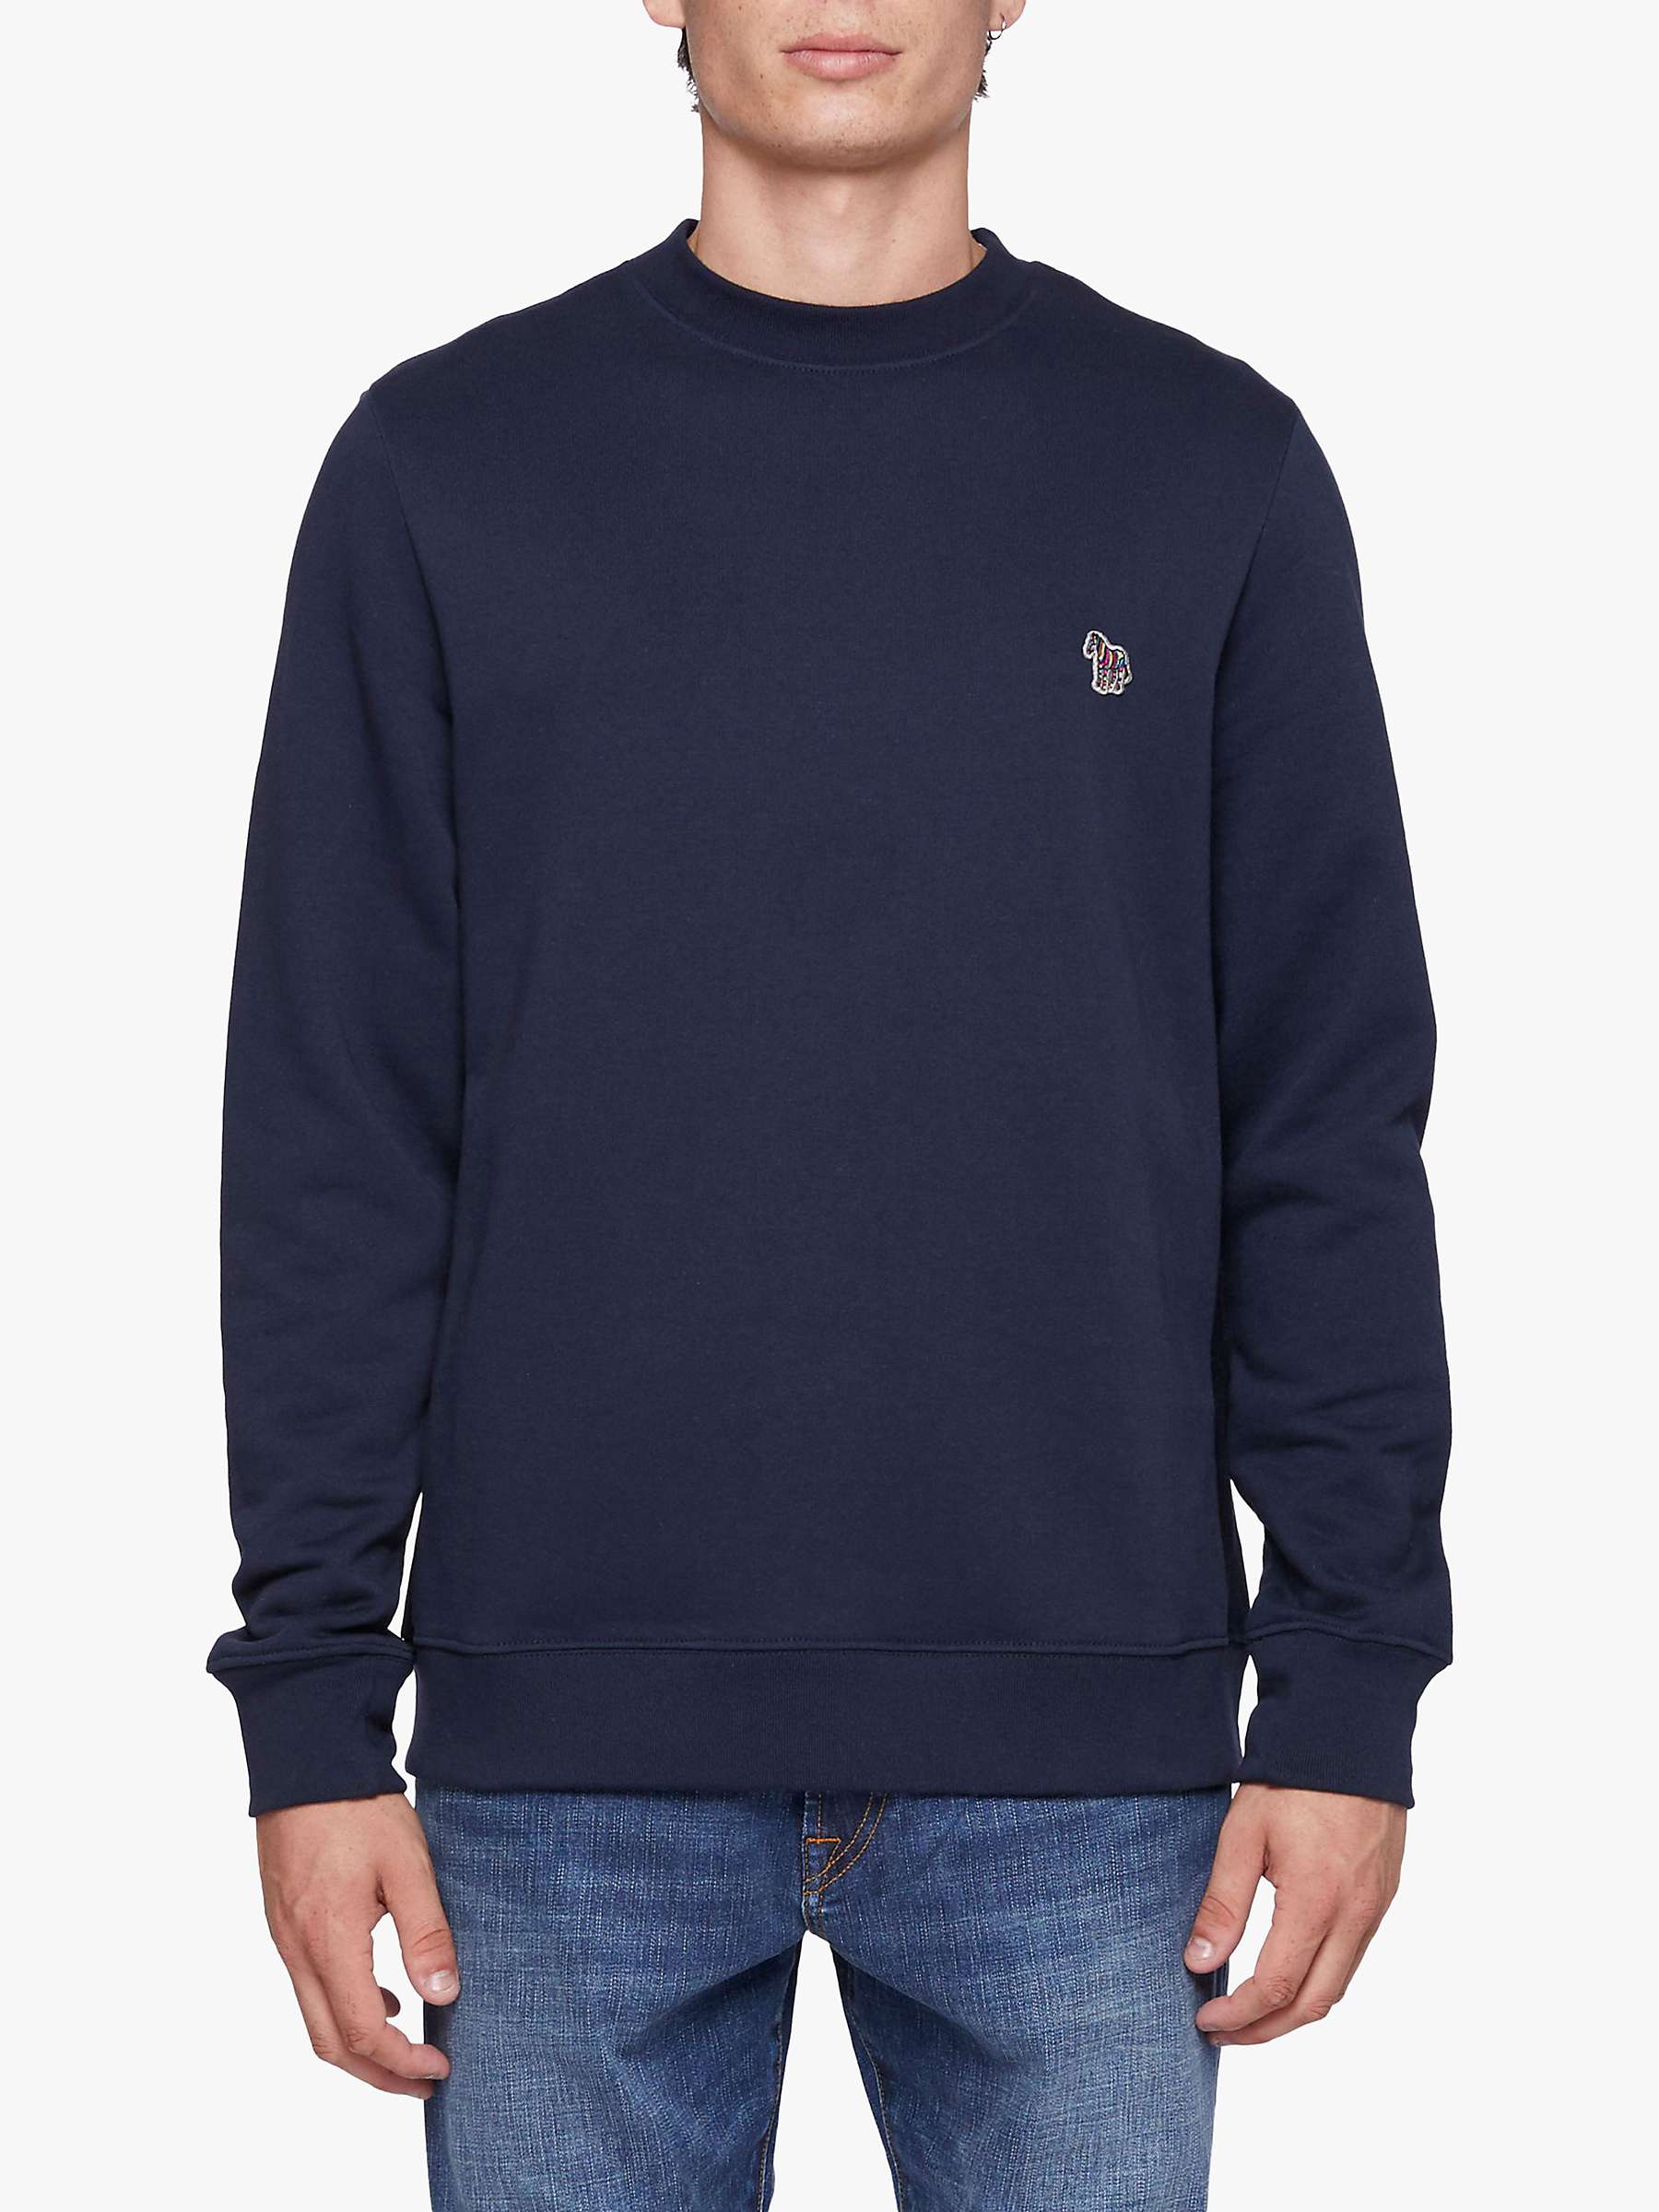 Buy Paul Smith Zebra Embroidered Organic Cotton Jumper Online at johnlewis.com